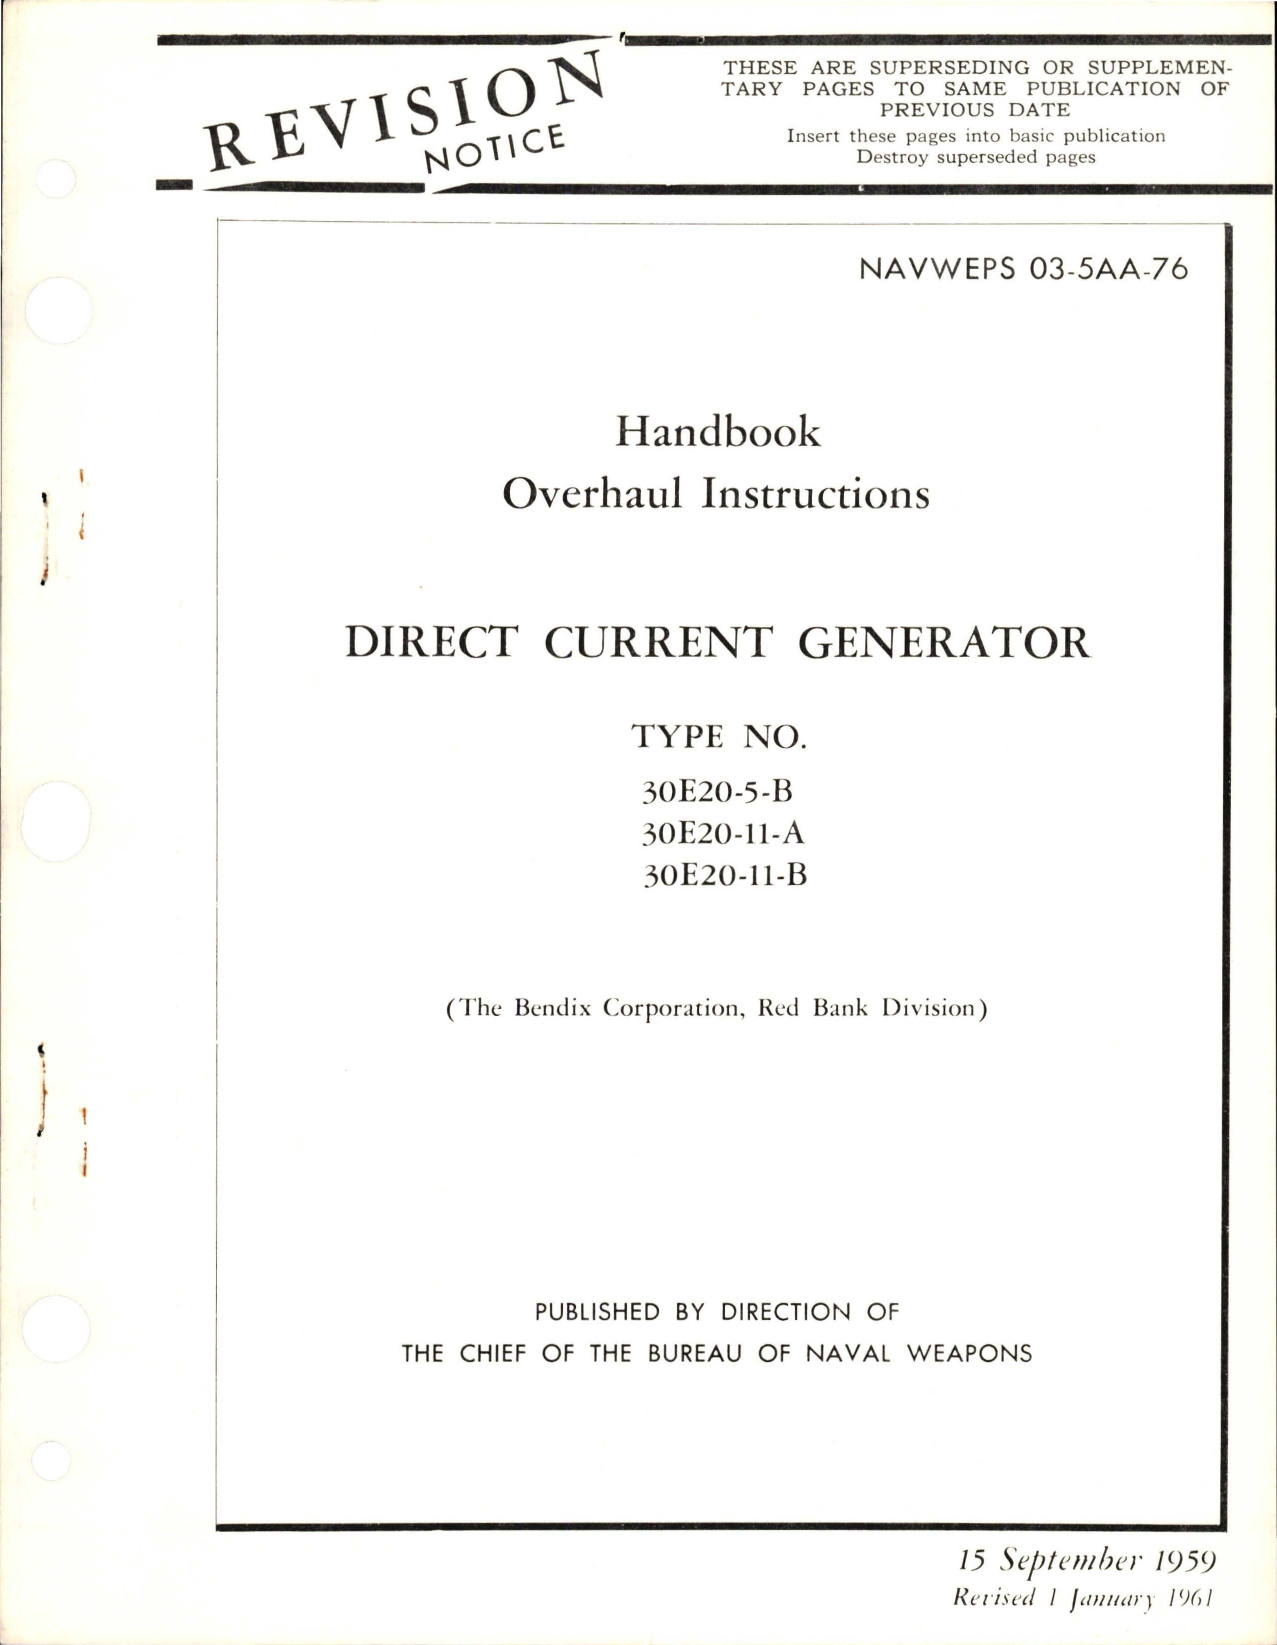 Sample page 1 from AirCorps Library document: Overhaul Instructions for Direct Current Generator - Type 30E20-5-B, 30E20-11-A, and 30E20-11-B